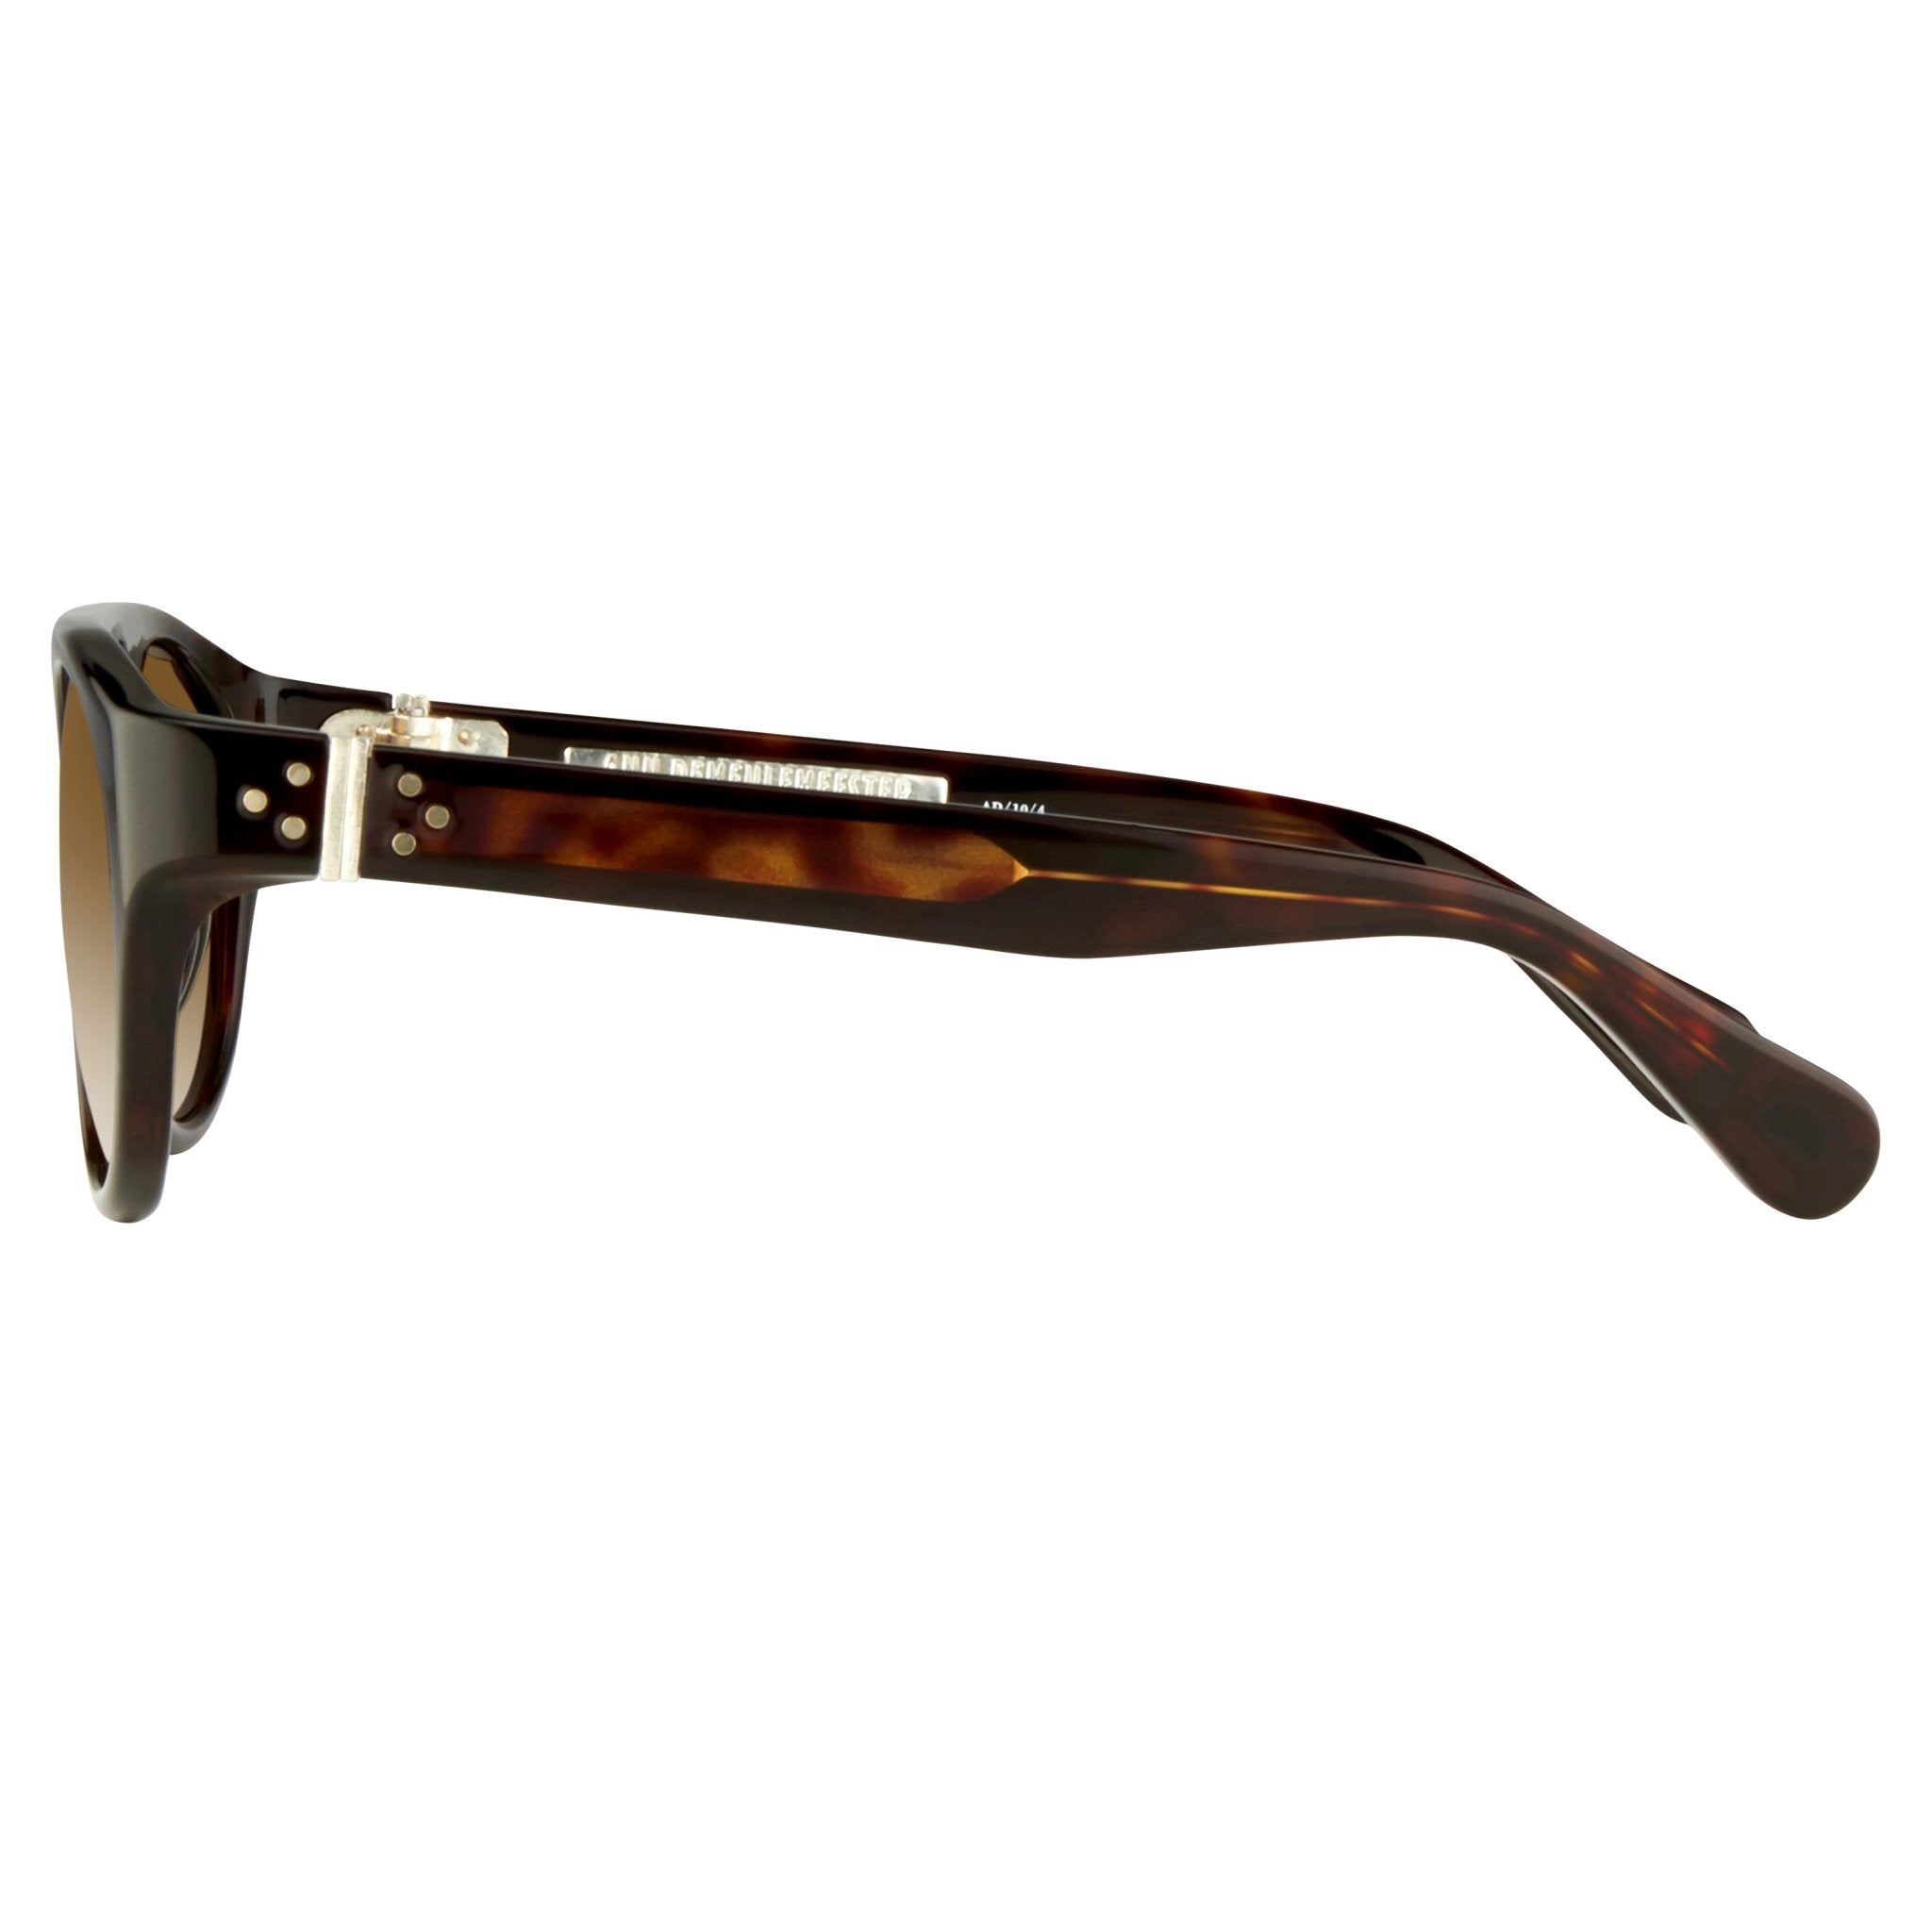 Ann Demeulemeester Sunglasses Flat Top Amber Tortoise Shell 925 Silver with Brown Lenses Category 3 AD10C4SUN - Watches & Crystals